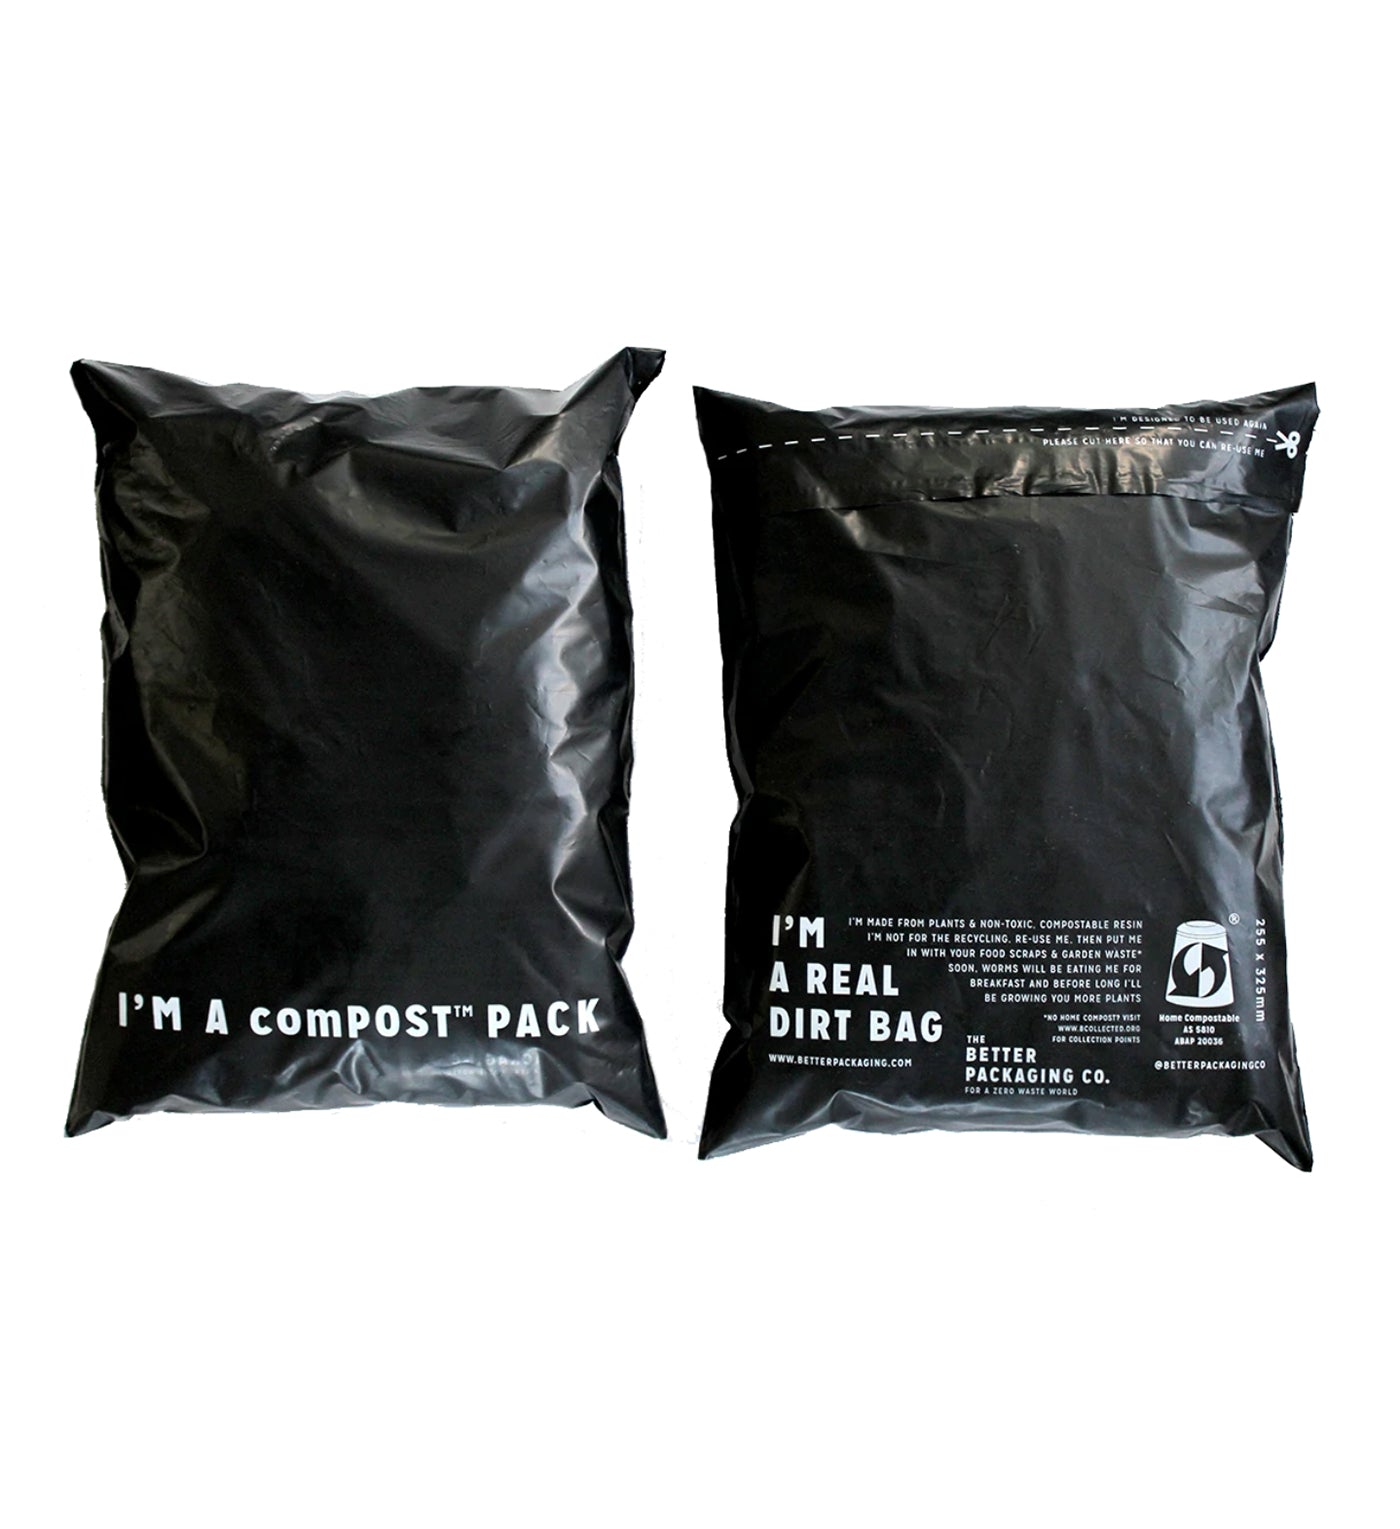 Two black bags with witty text, one saying 'I'm a Compost Pack' and the other proudly declaring 'I'm a Real Dirt Bag'